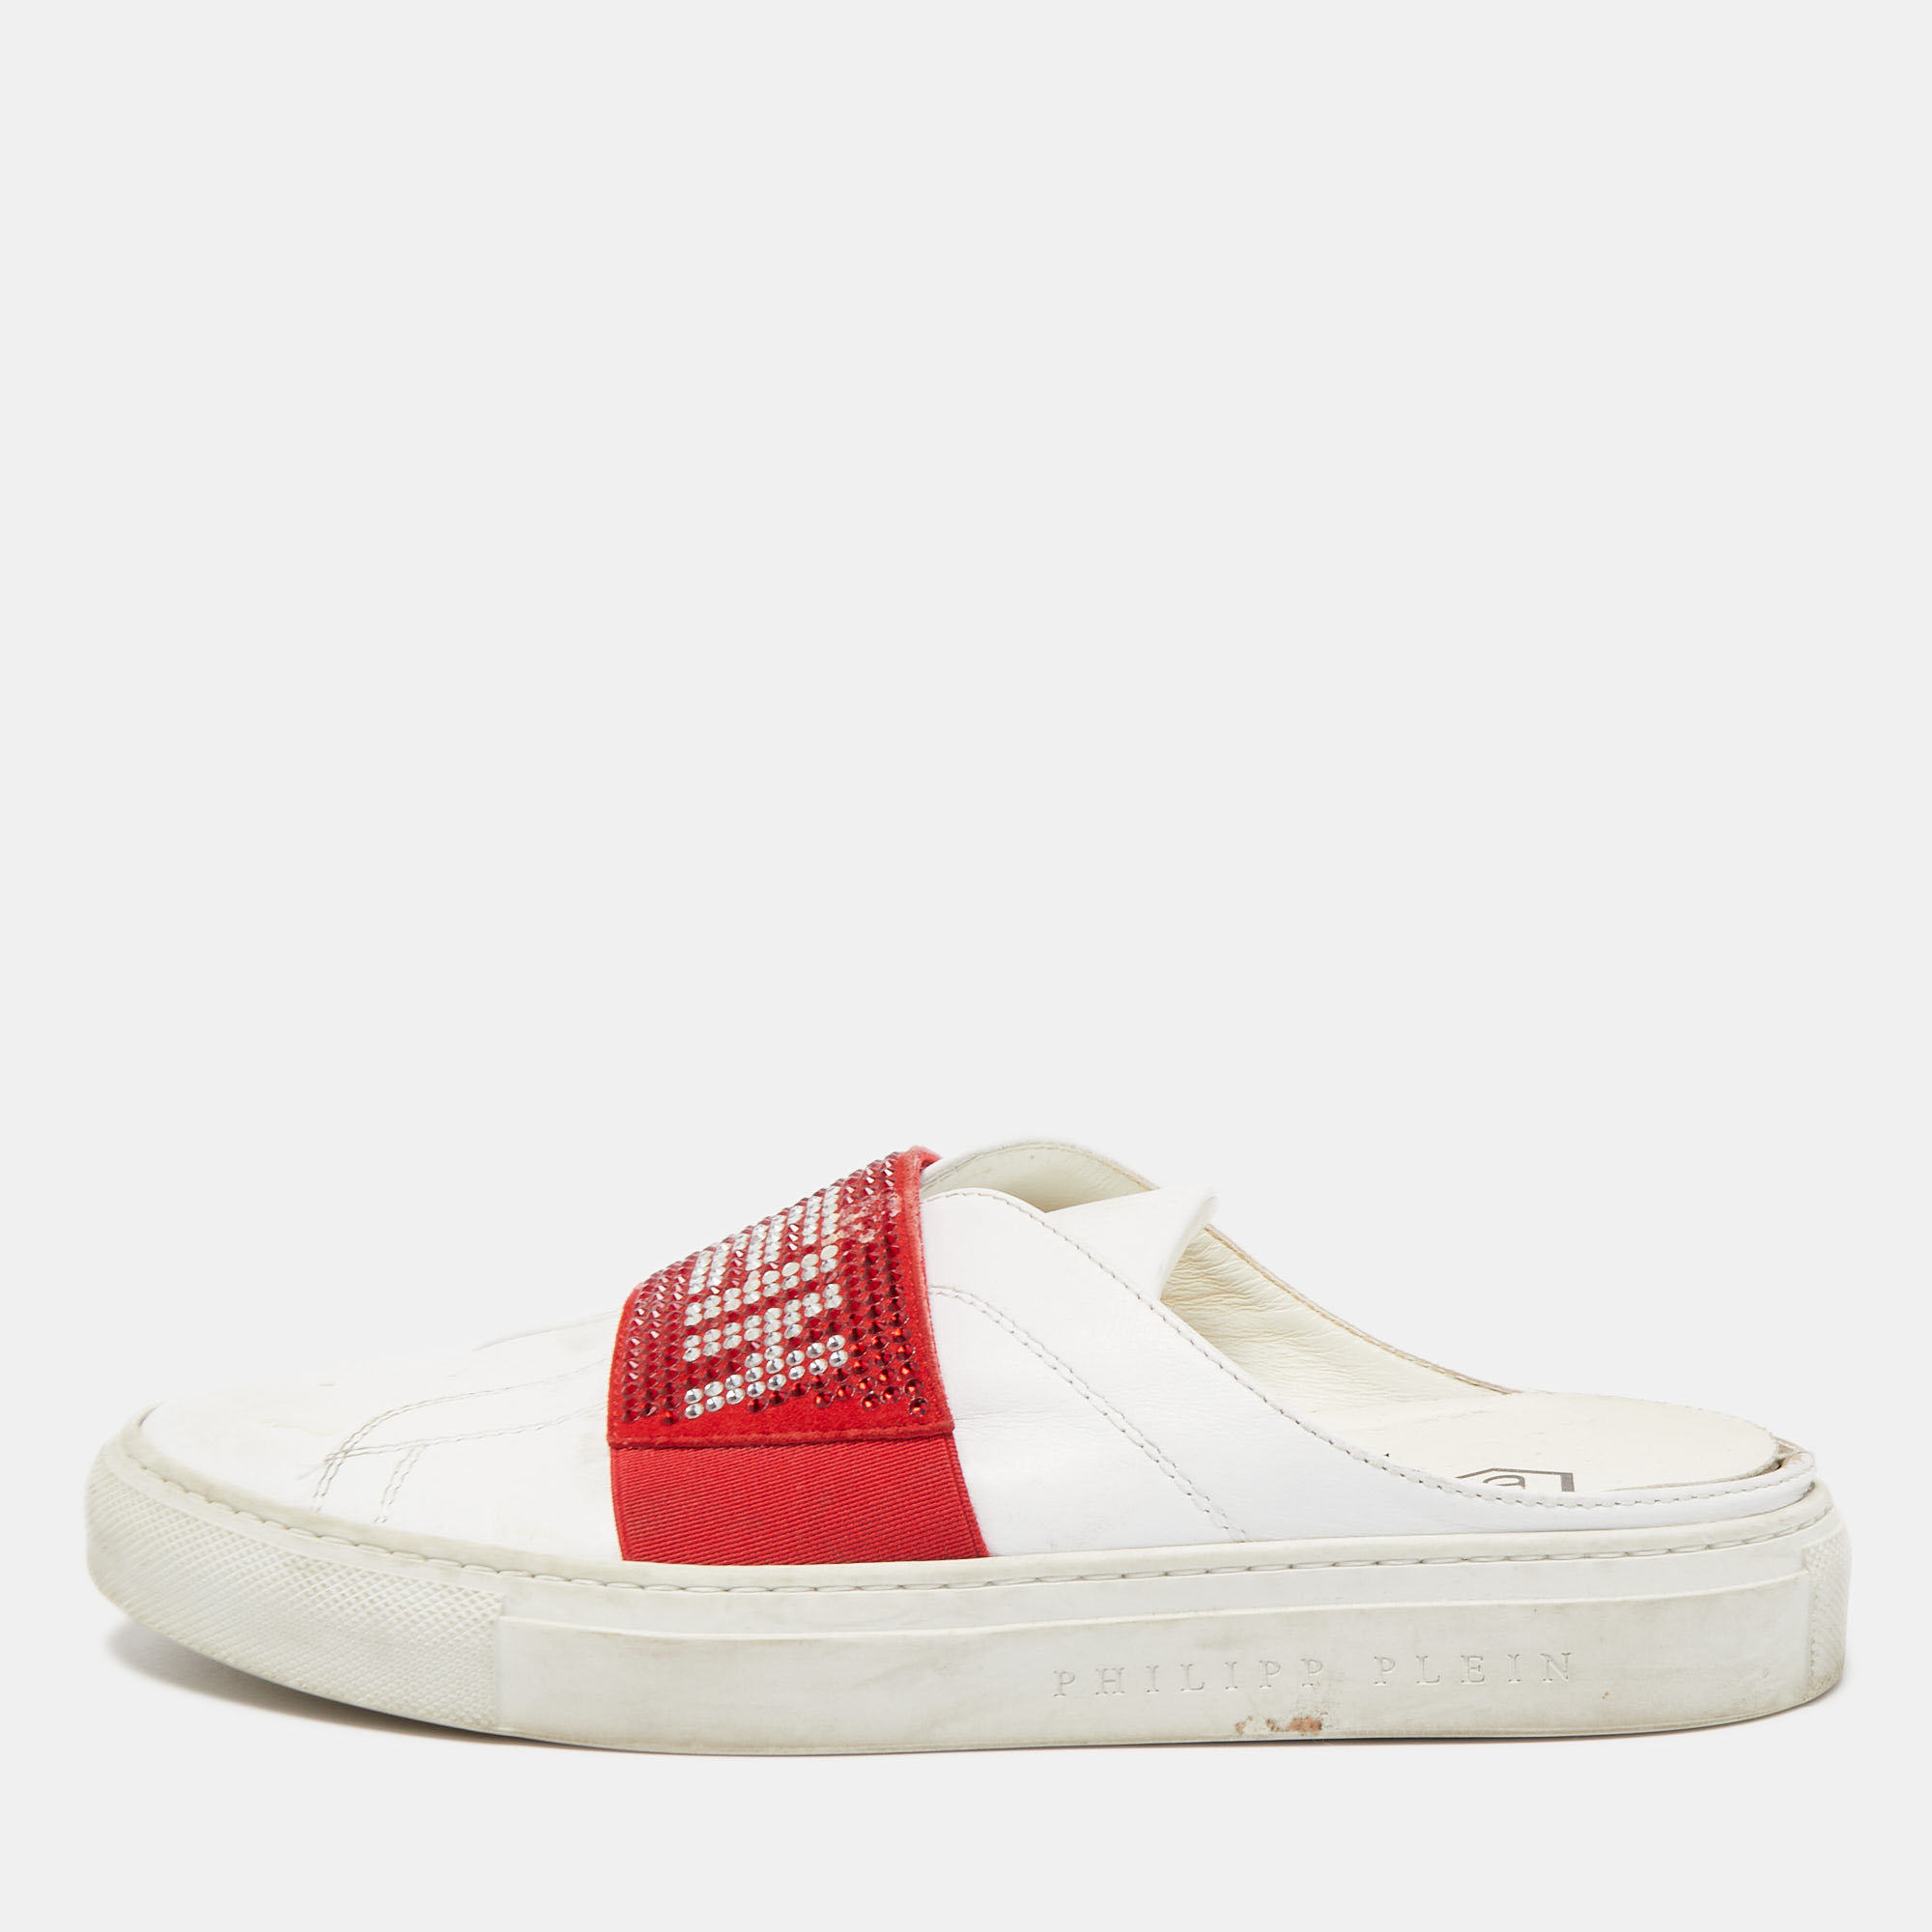 Pre-owned Philipp Plein Phillip Plein White/red Leather Crystal Embellished Logo Trainer Mules Size 38